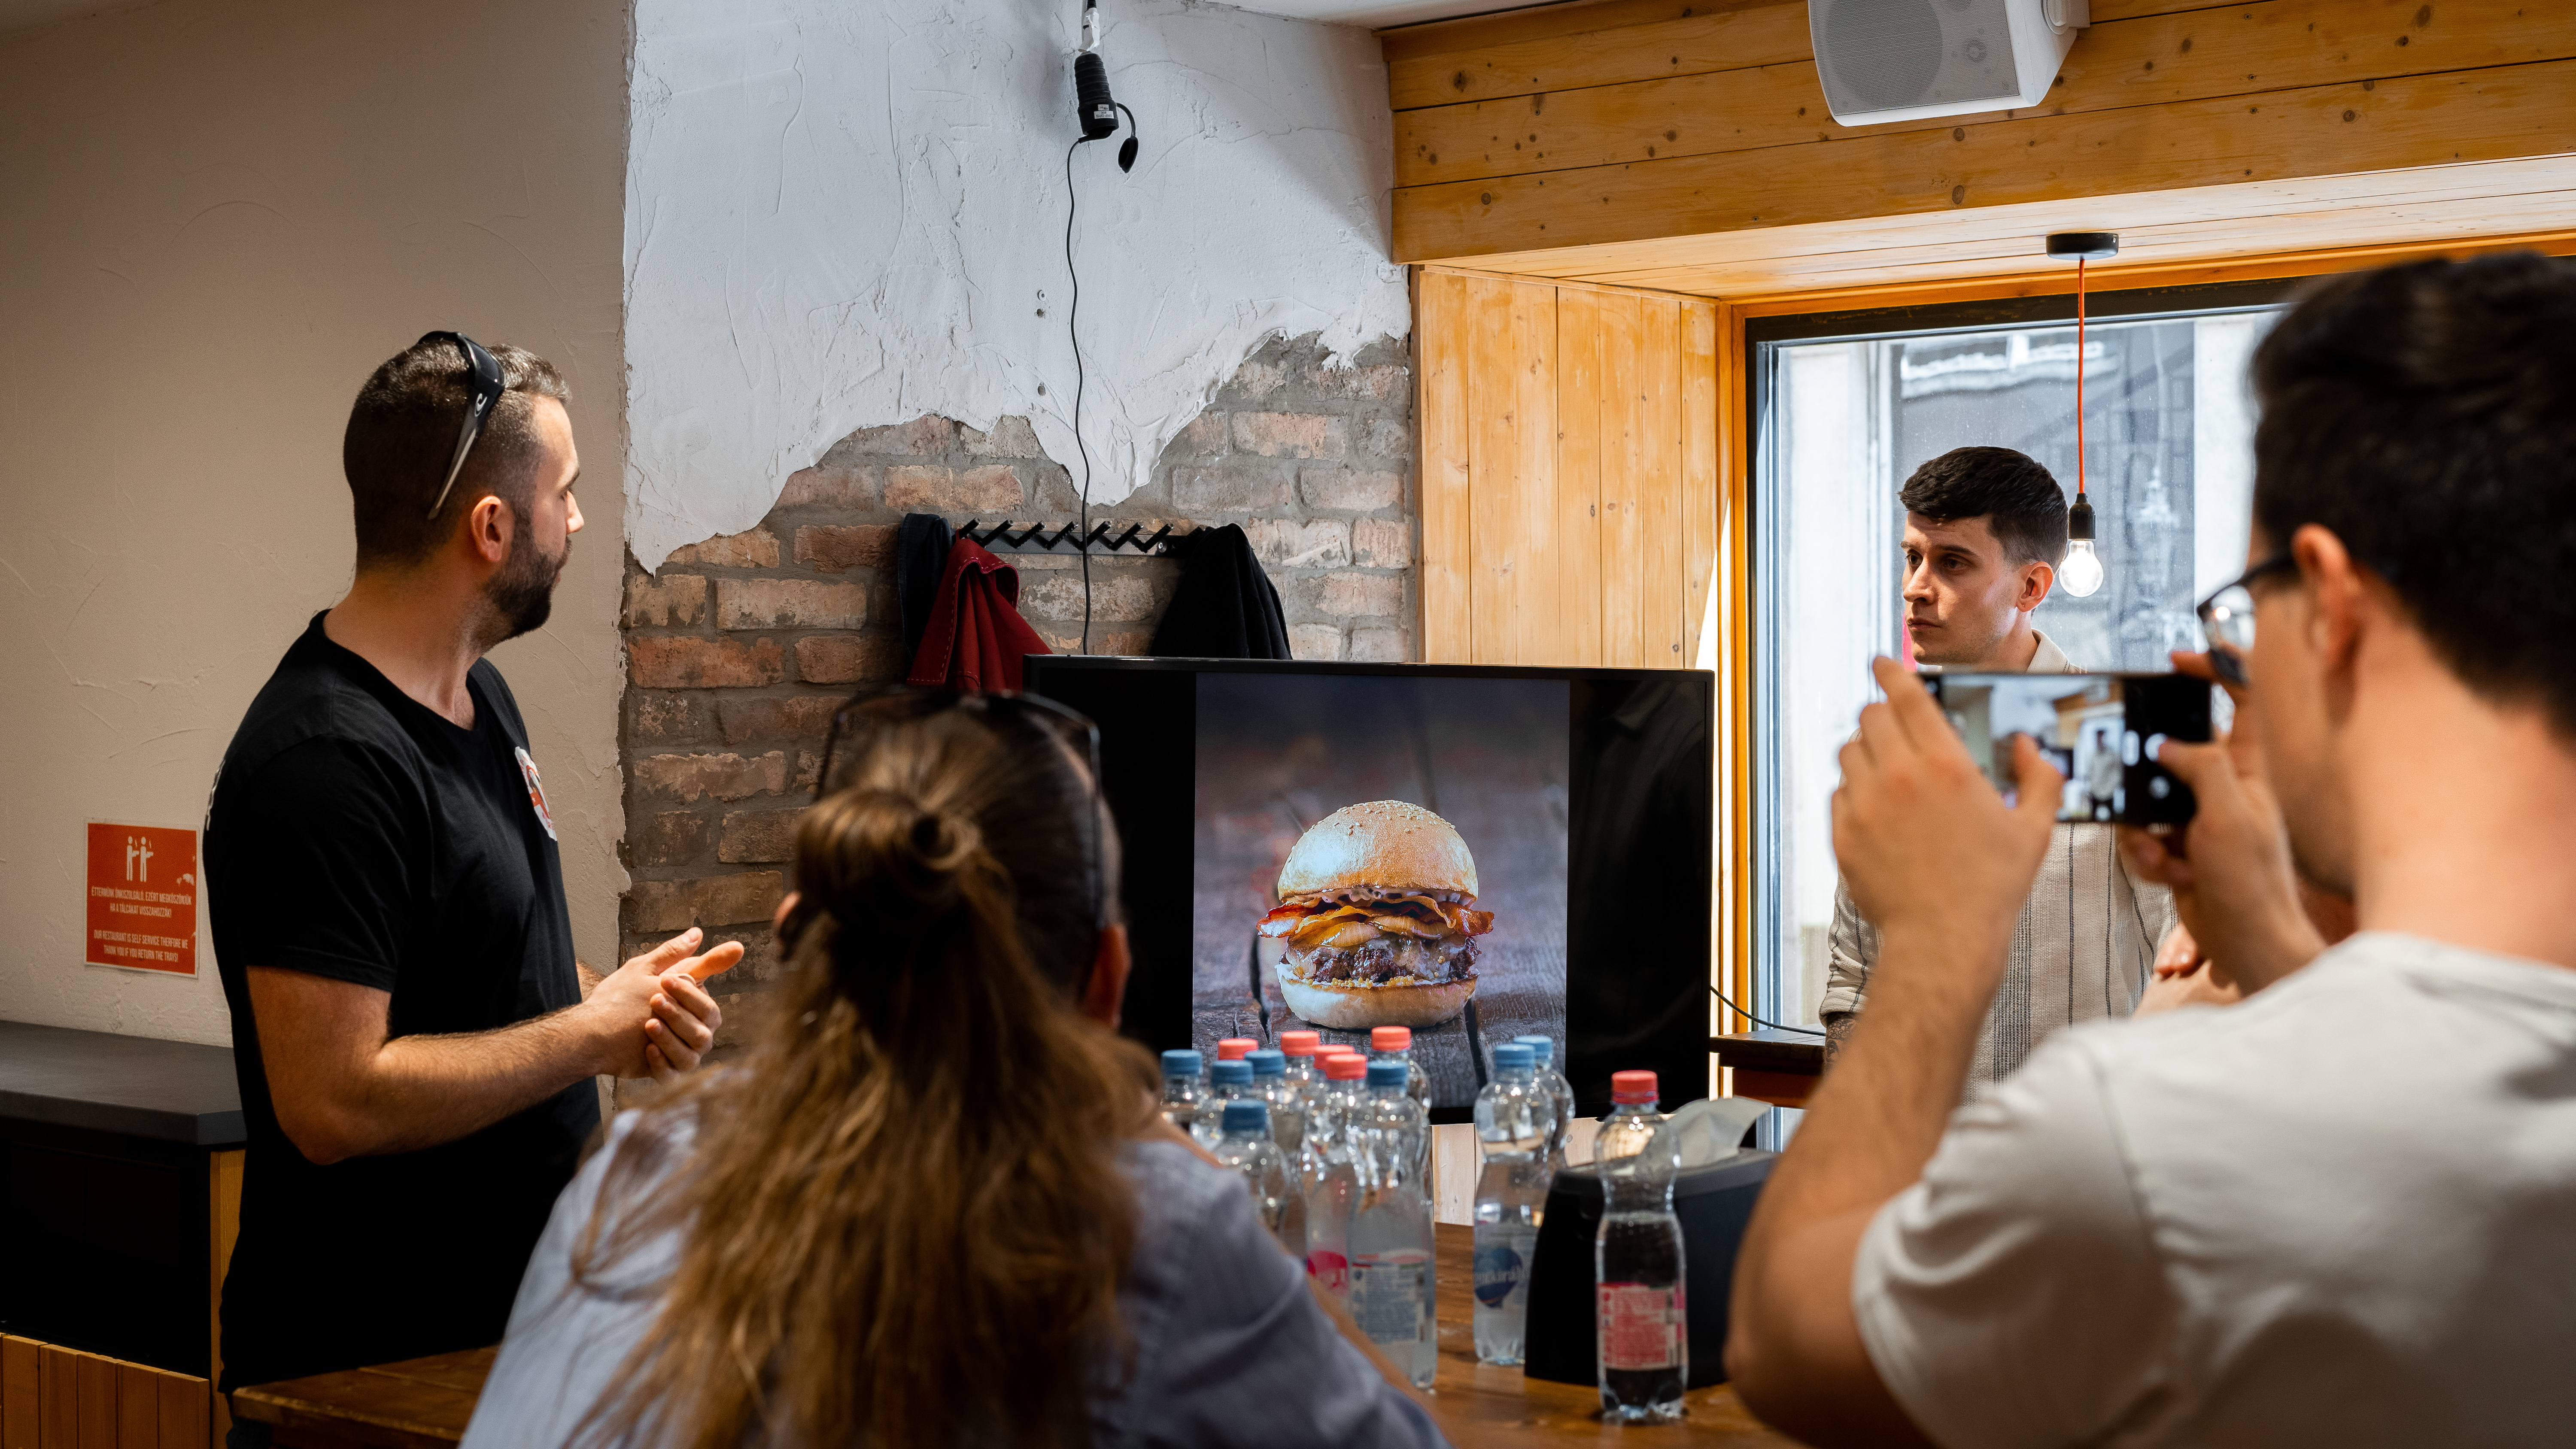 Virtual or real? NFTs come to Hungary in the form of a 3D burger